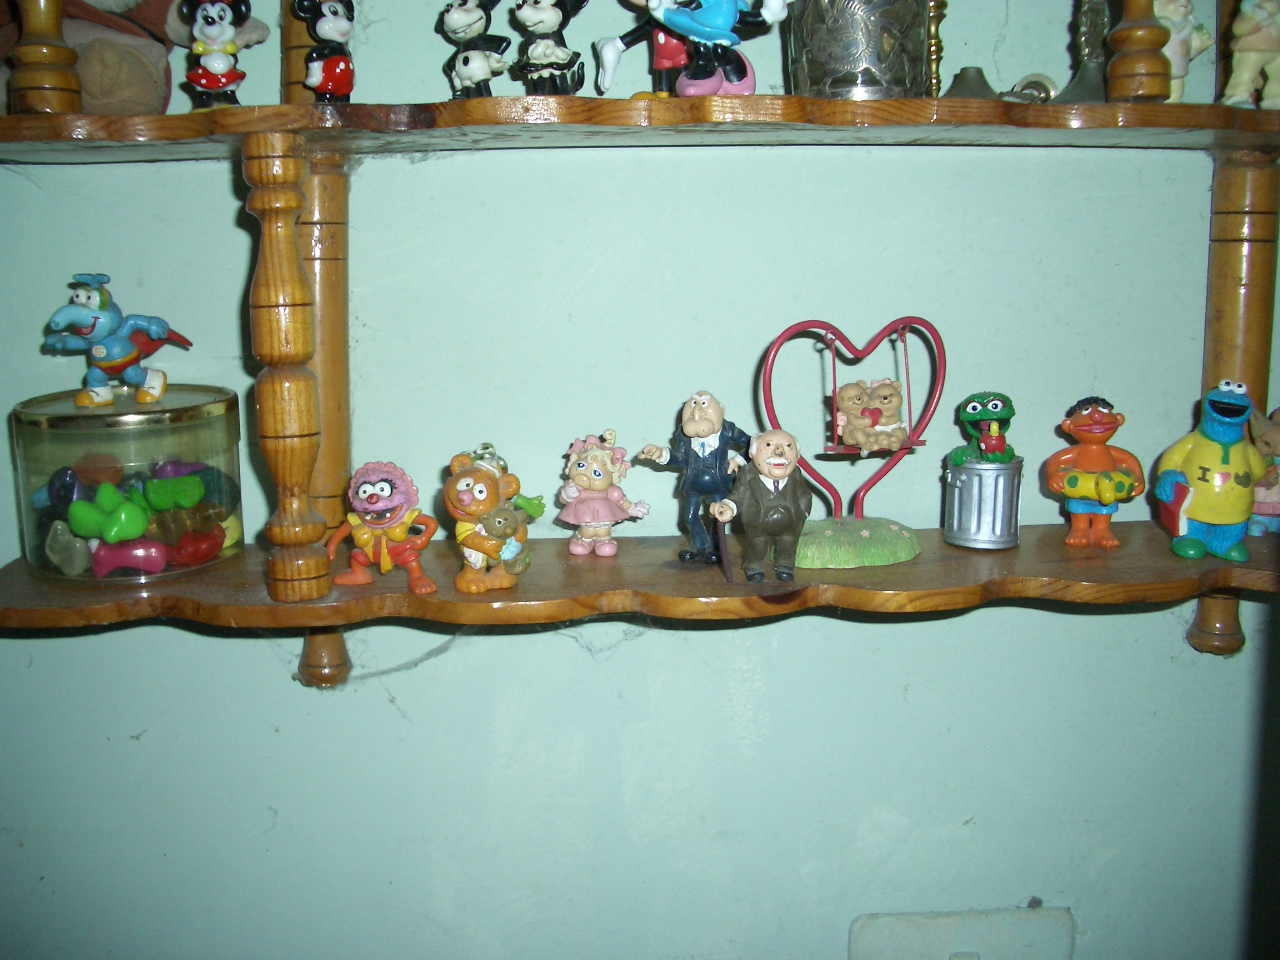 shelves filled with figurines and small figurines on them